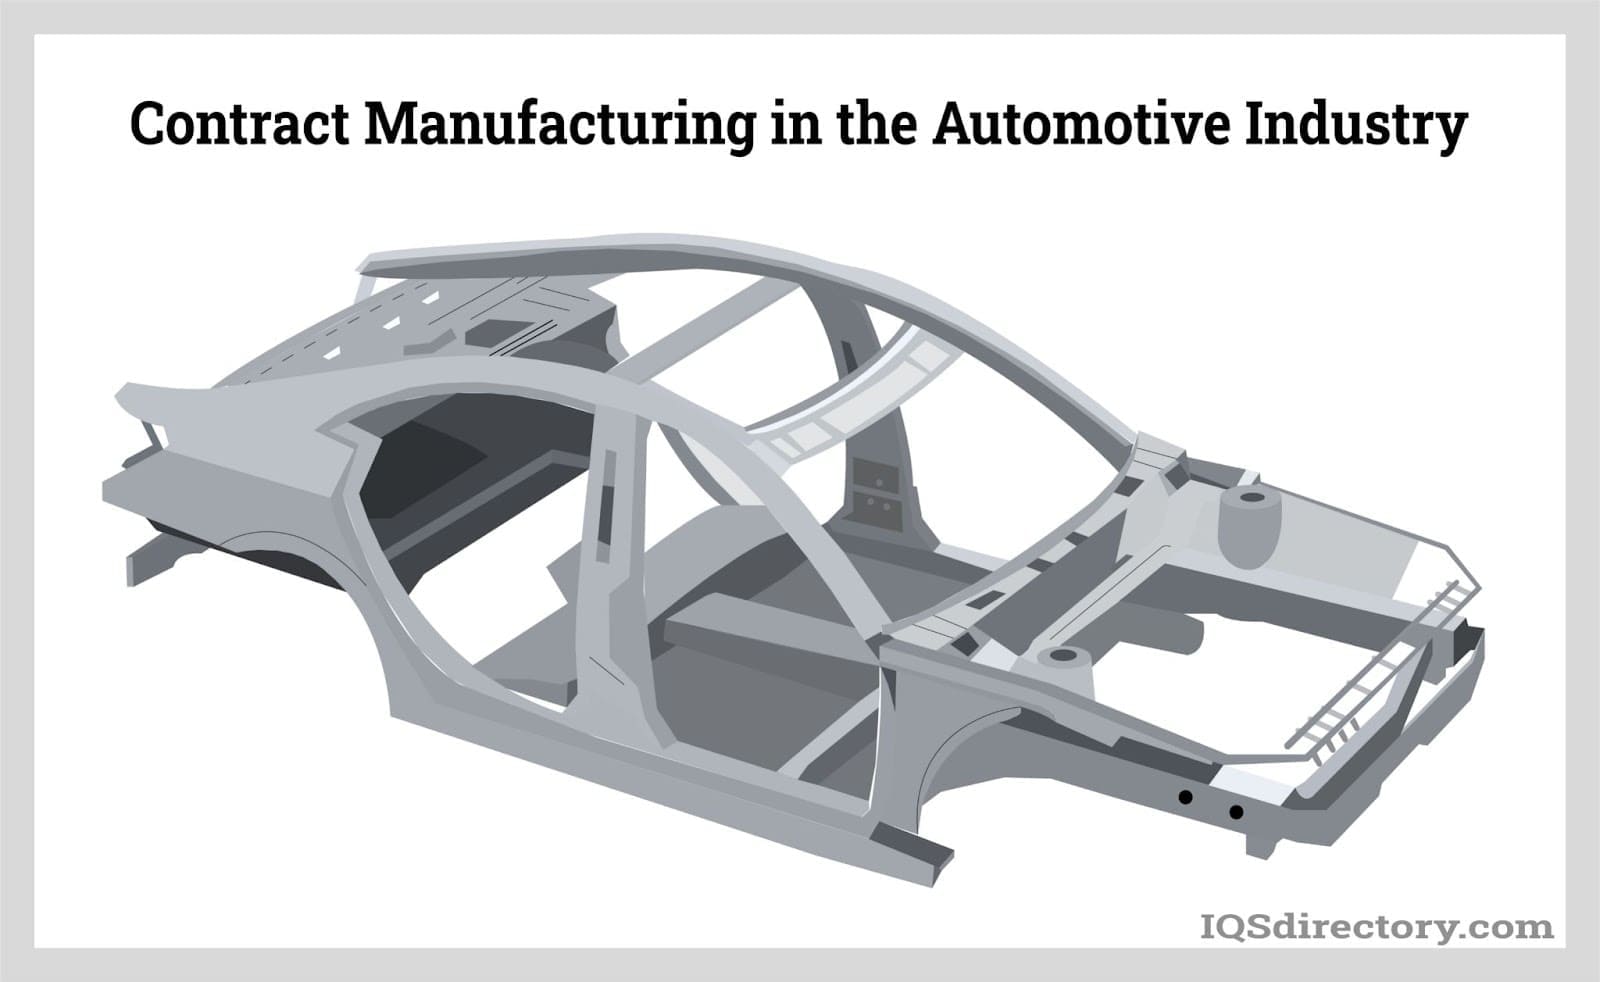 Contract Manufacturing in the Automotive Industry